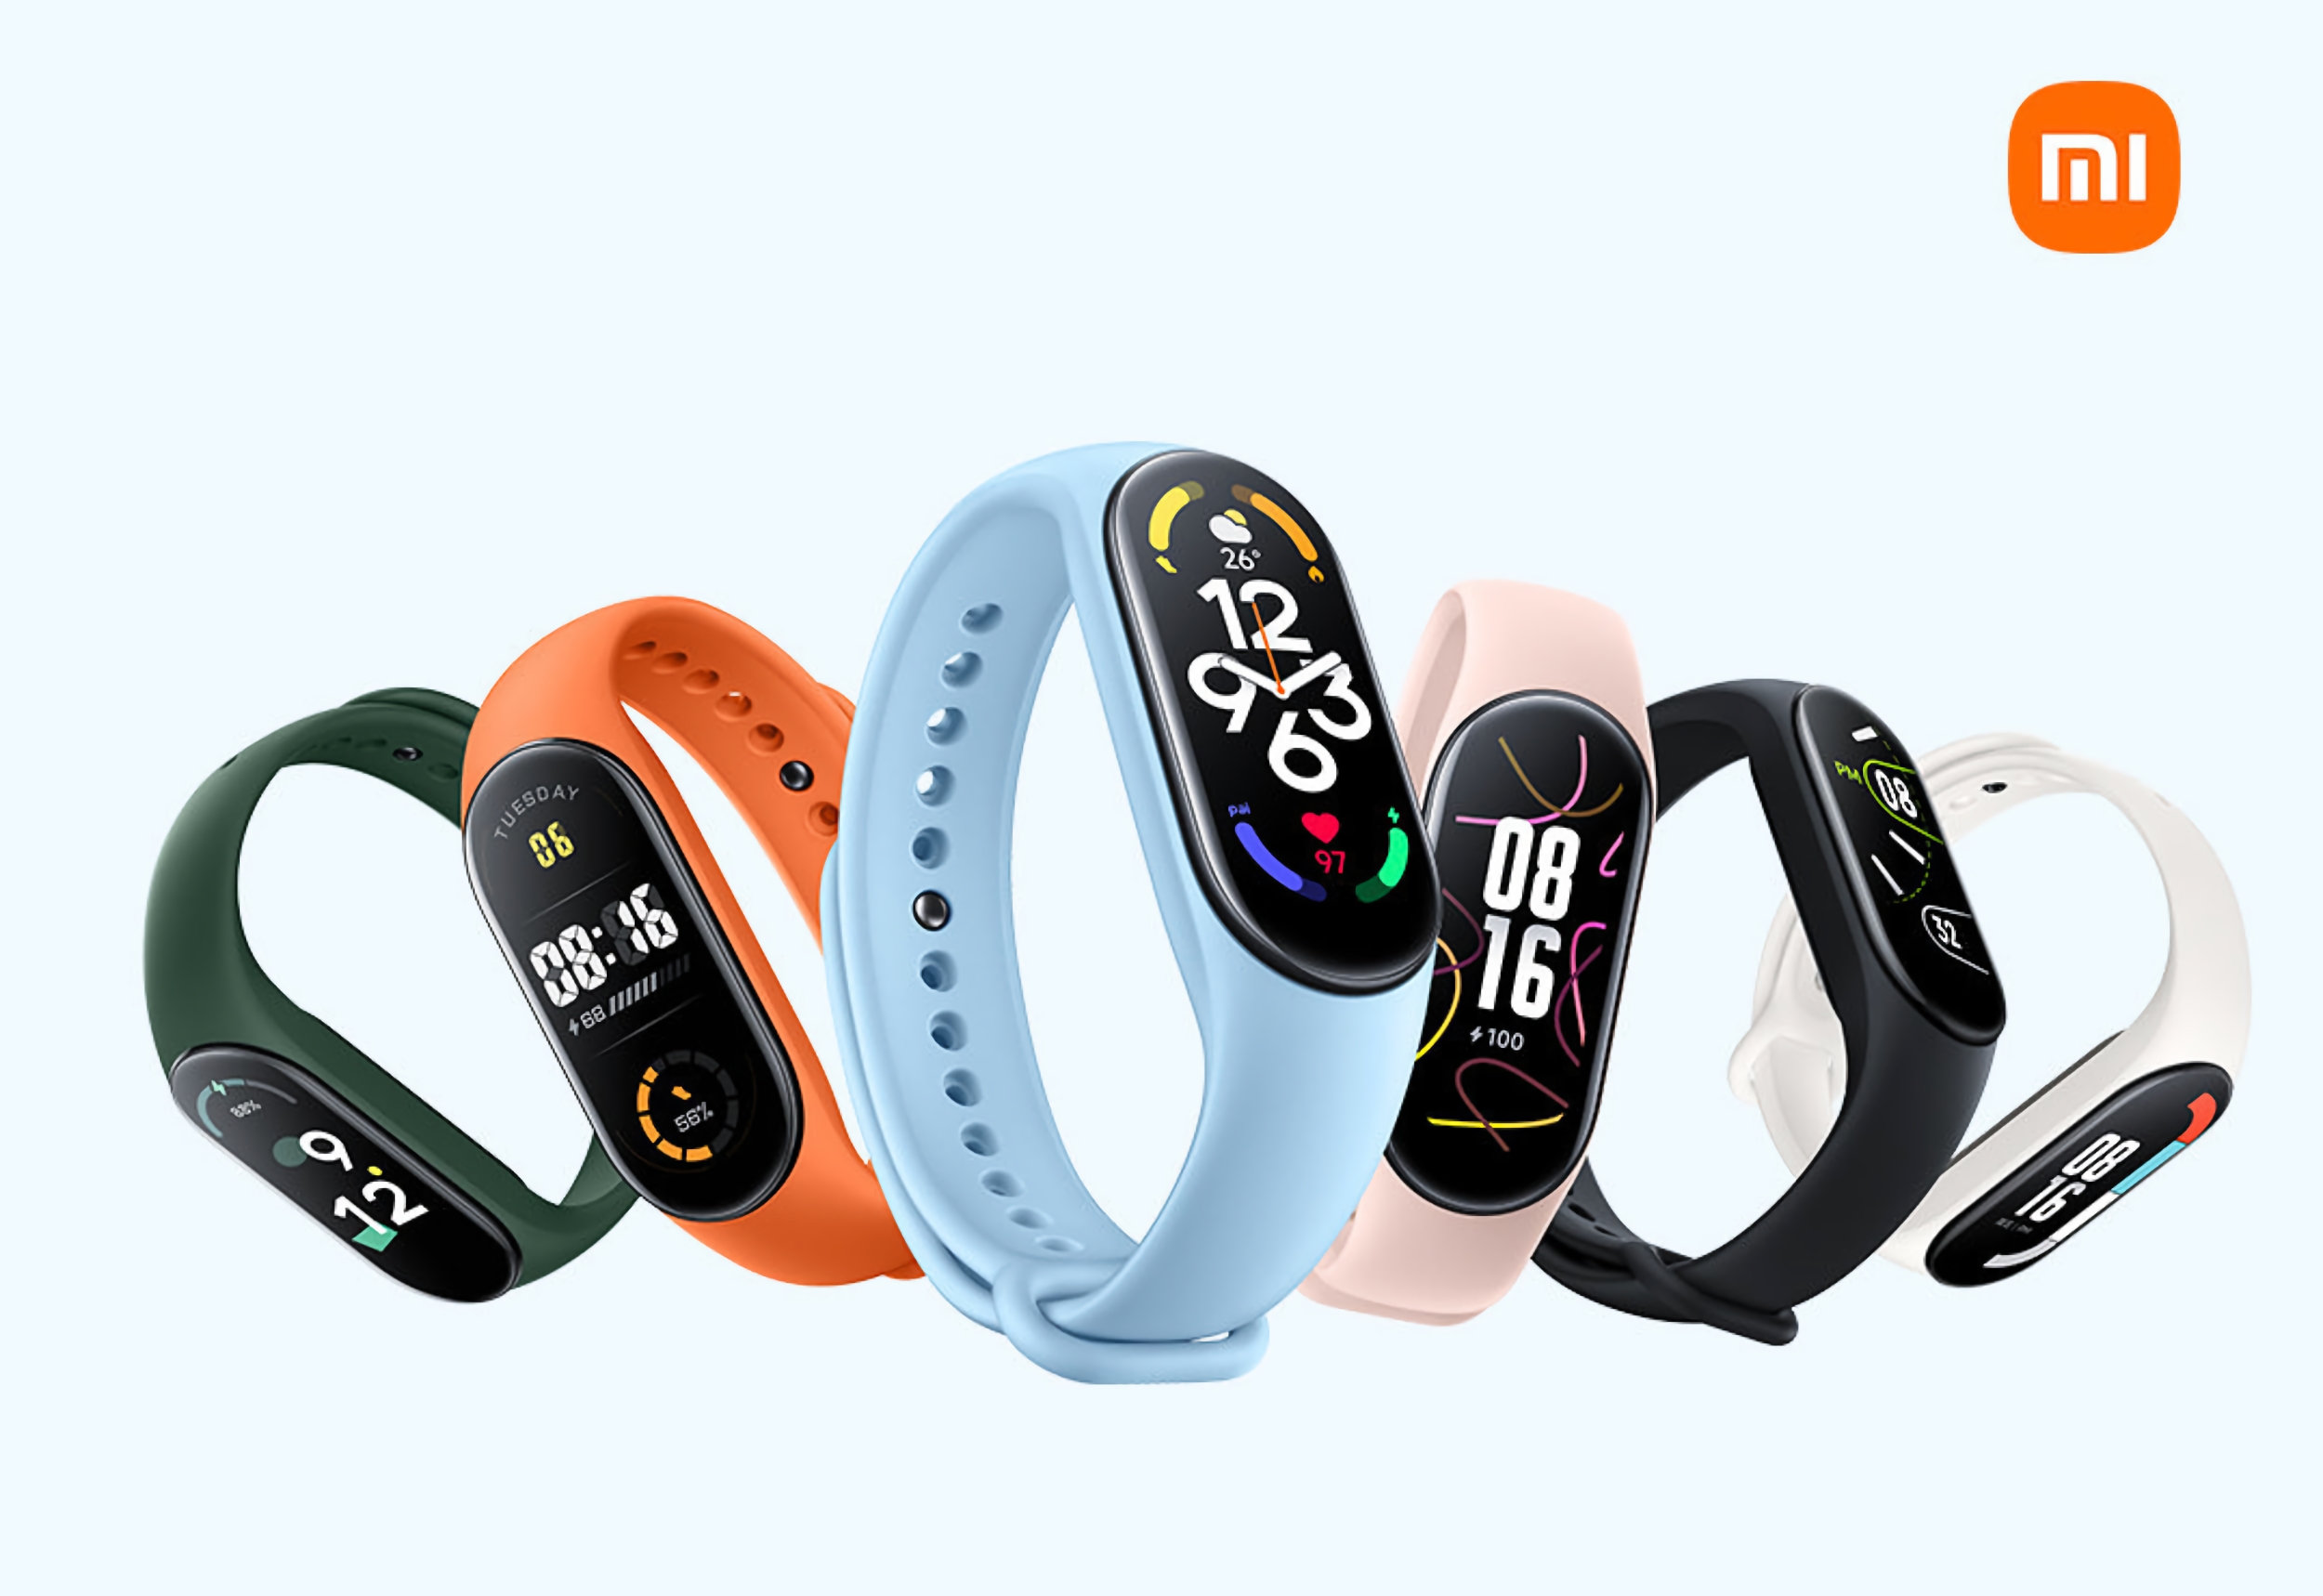 Xiaomi Mi Band 7: Bigger Screen with Always-On Display Support, 120 Sports Modes, SpO2 Sensor, NFC and Price Starting at $35